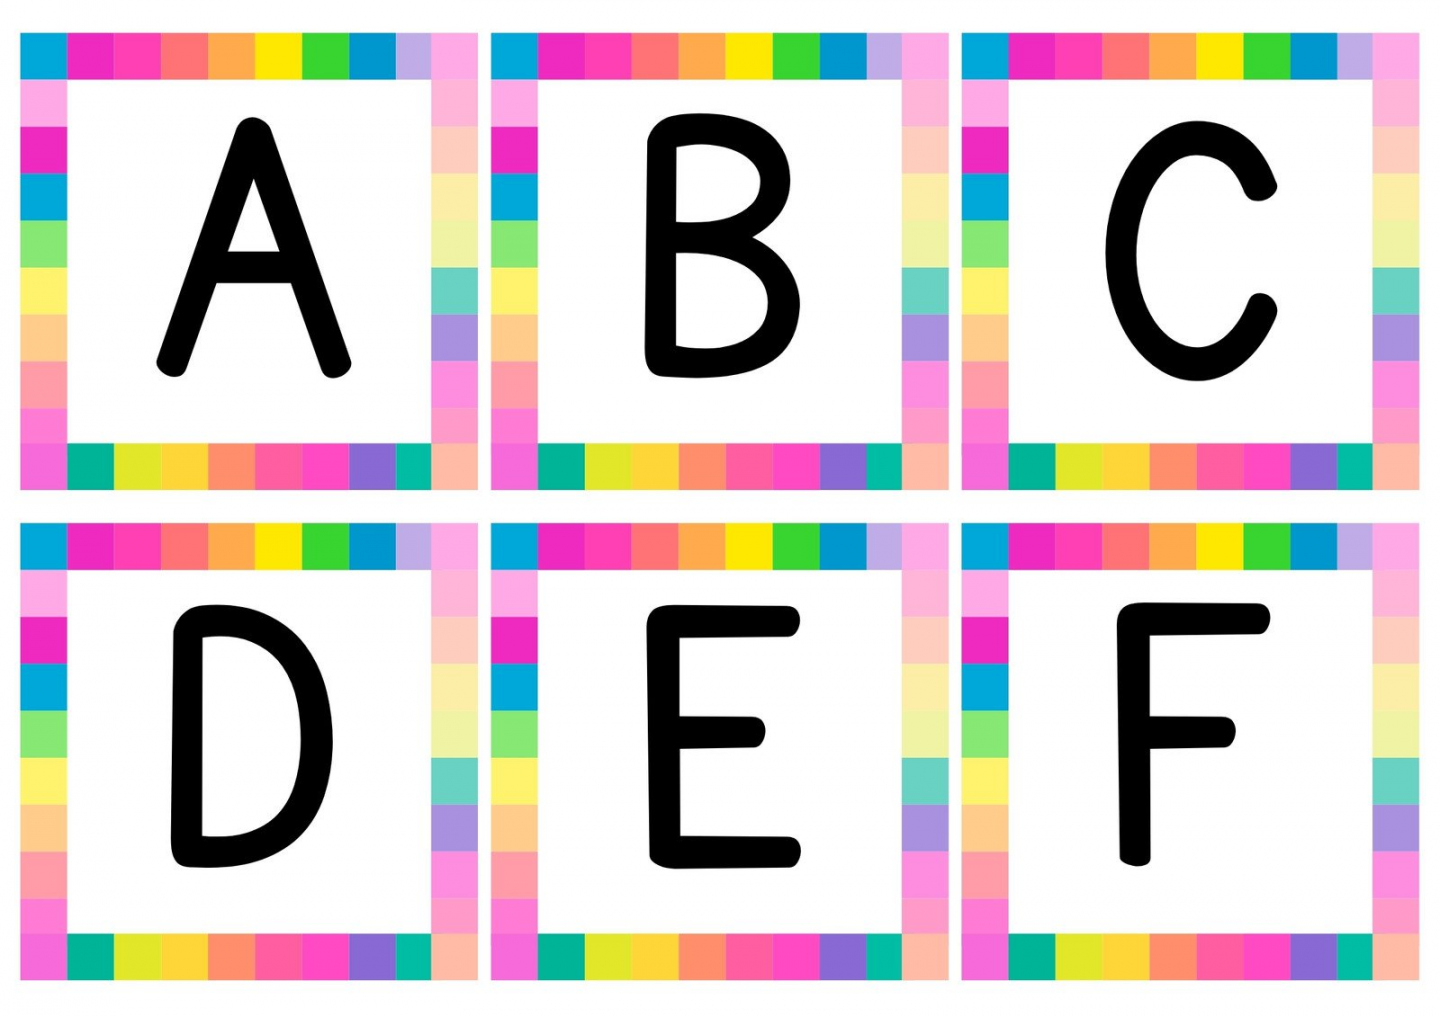 Free customizable alphabet flashcard templates  Canva - FREE Printables - Free Printable Alphabet Flash Cards Upper And Lower Case